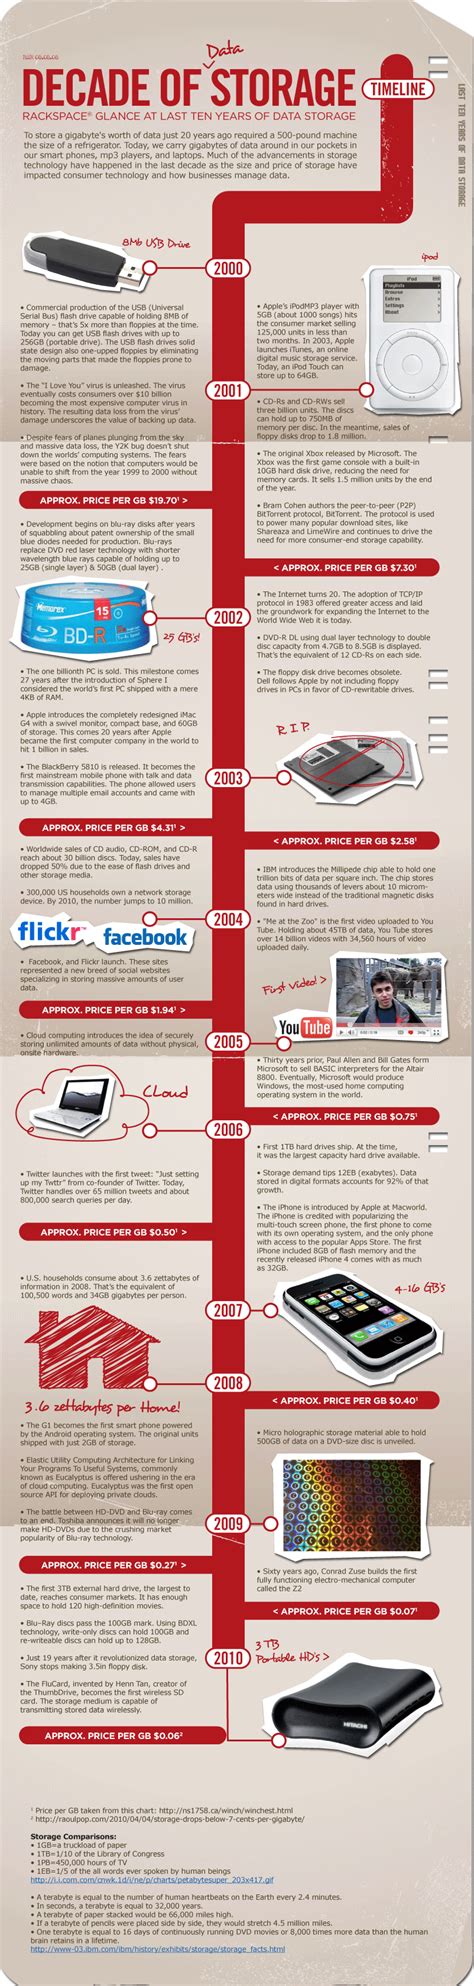 When a computer has no storage device, it will not have within its configuration the ability to recall any information or settings, and hence would be a dumb. Decade of Storage: From USB to Cloud Storage (infographic ...